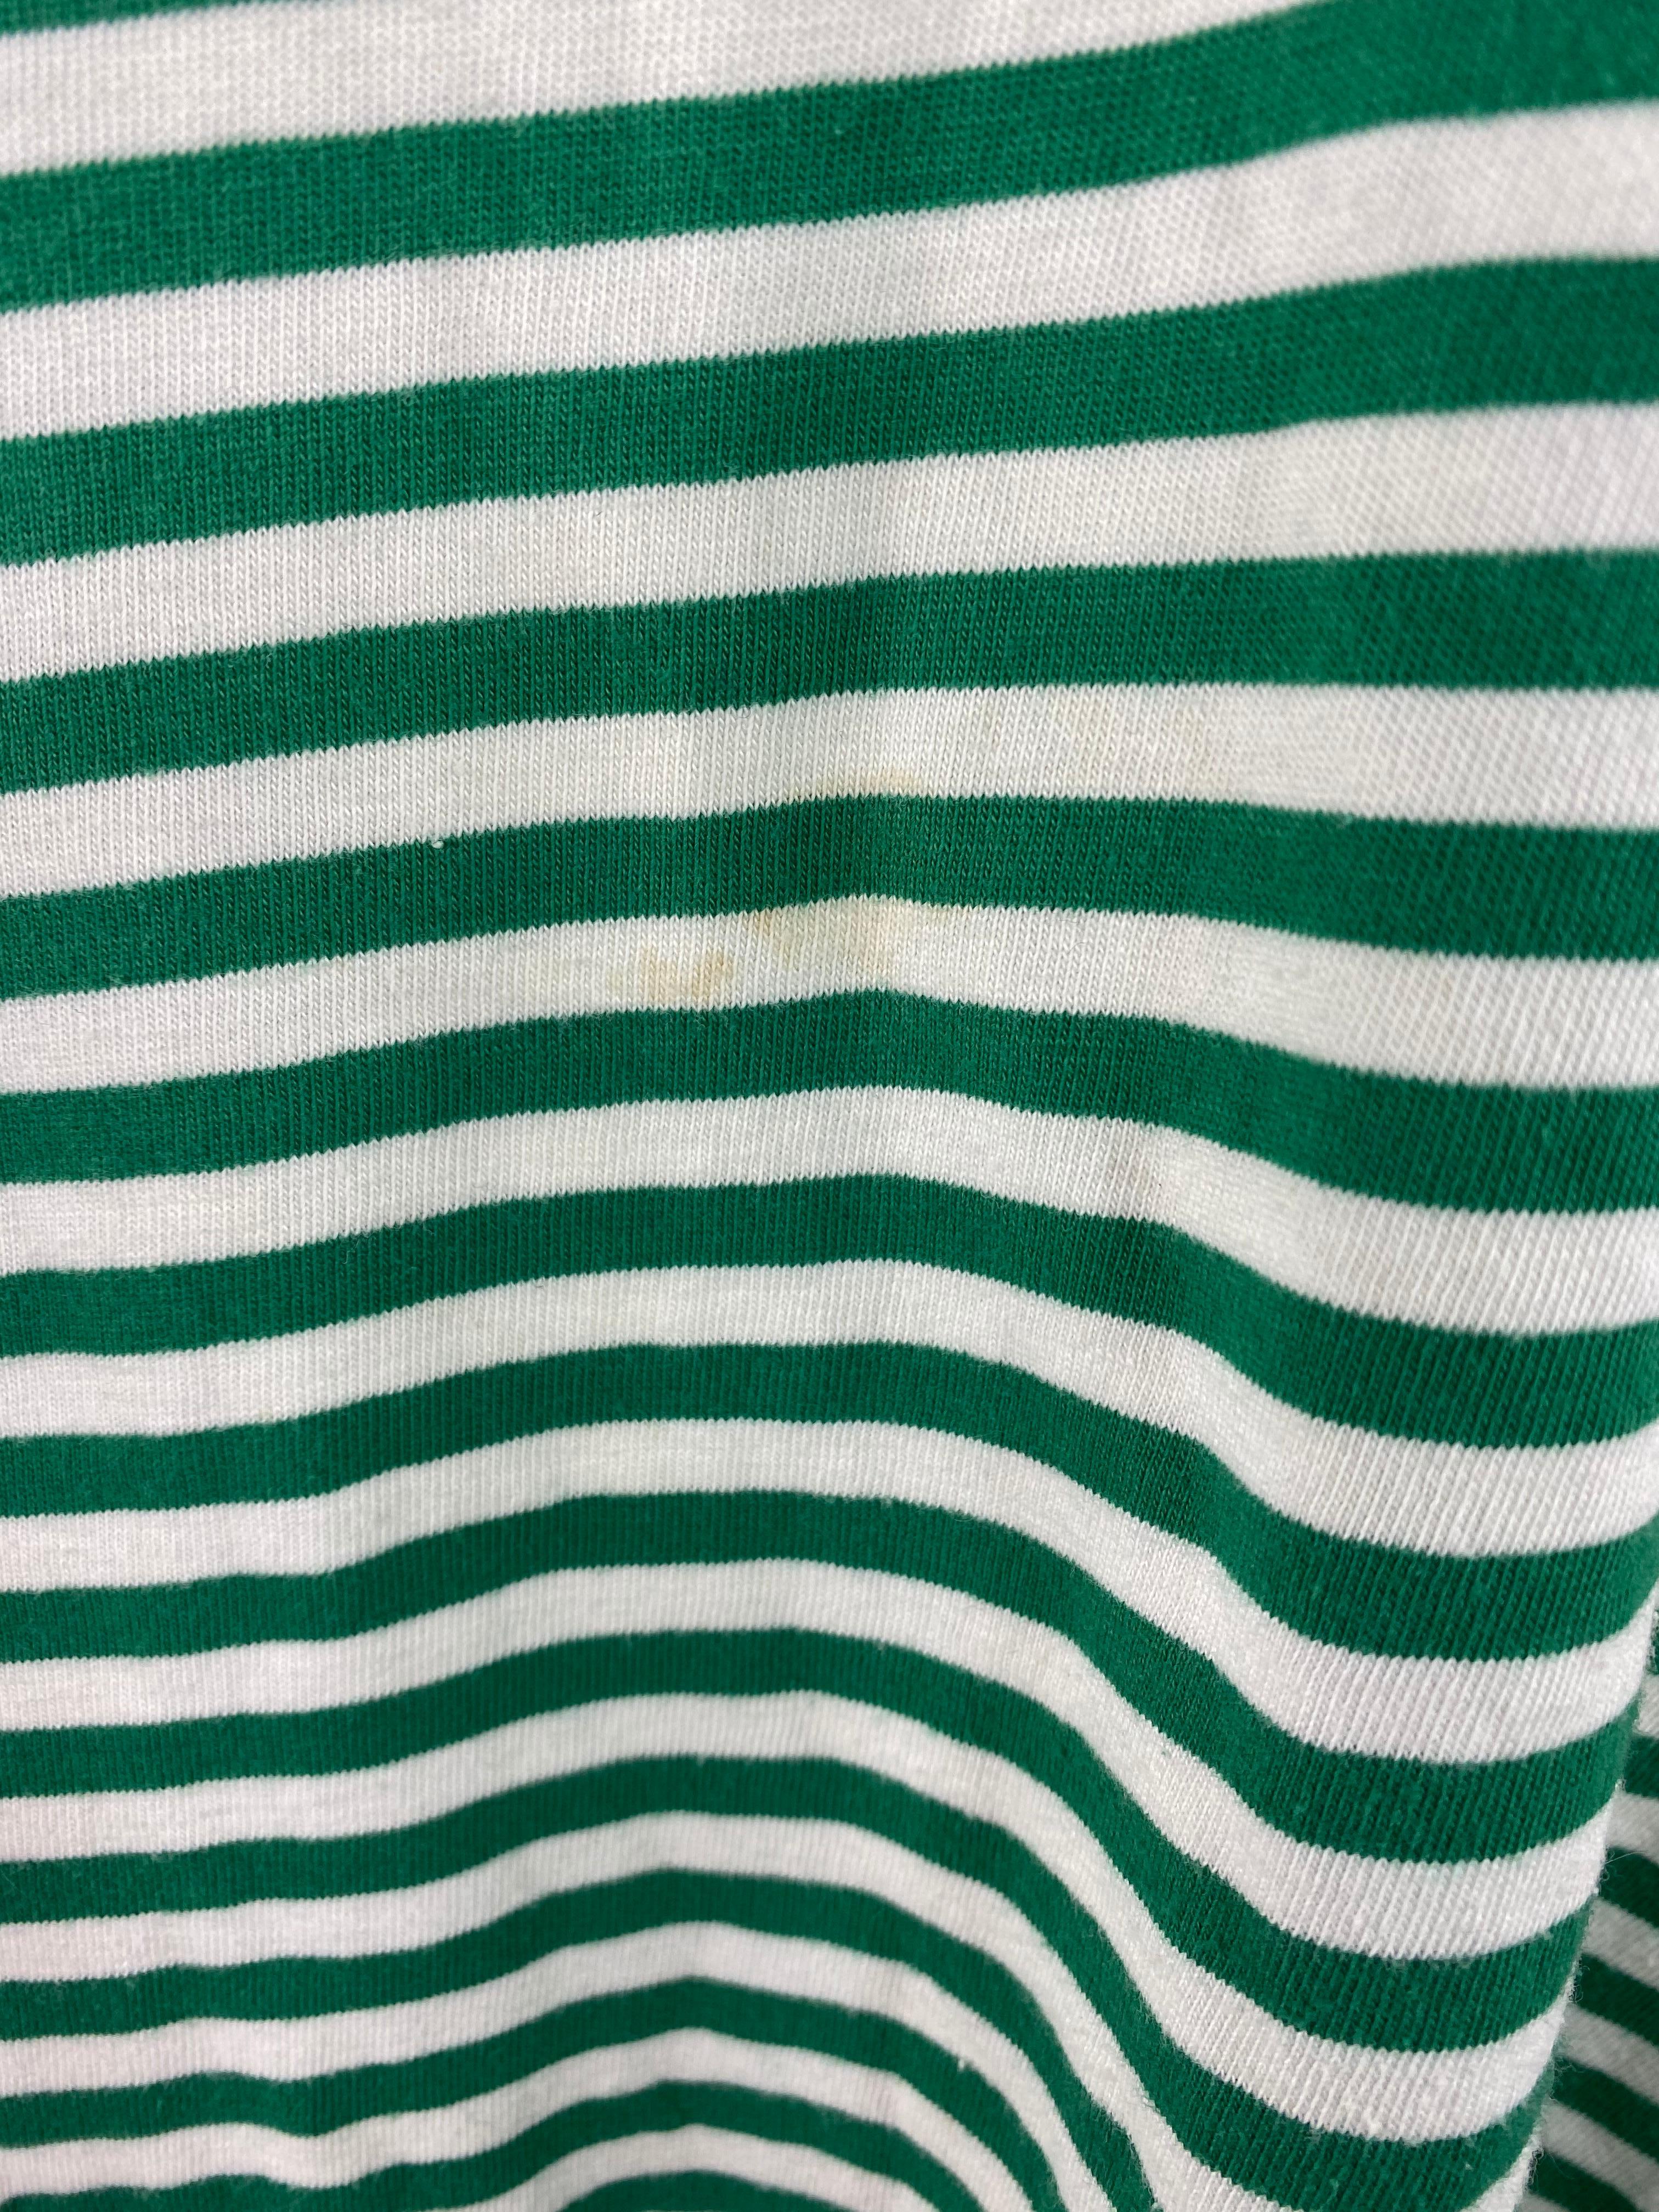 Product details:

The T- Shirt features 100% cotton, green and white striped pattern with two gold buttons detail on each sides, crew neck line with short sleeves. Made in France.